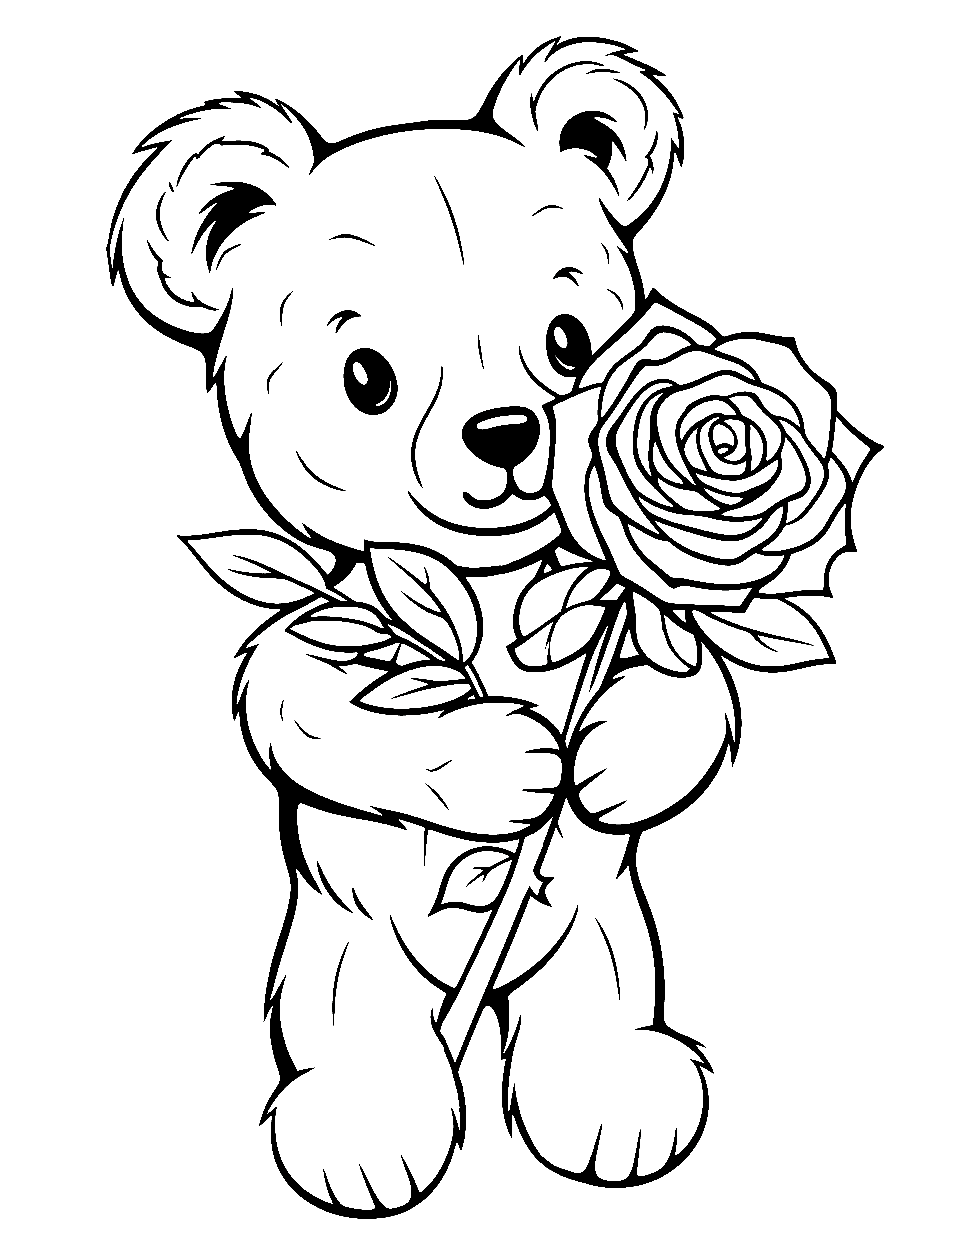 Teddy Bear Clutching a Rose Coloring Page - A fluffy teddy bear holding a rose close to its heart.